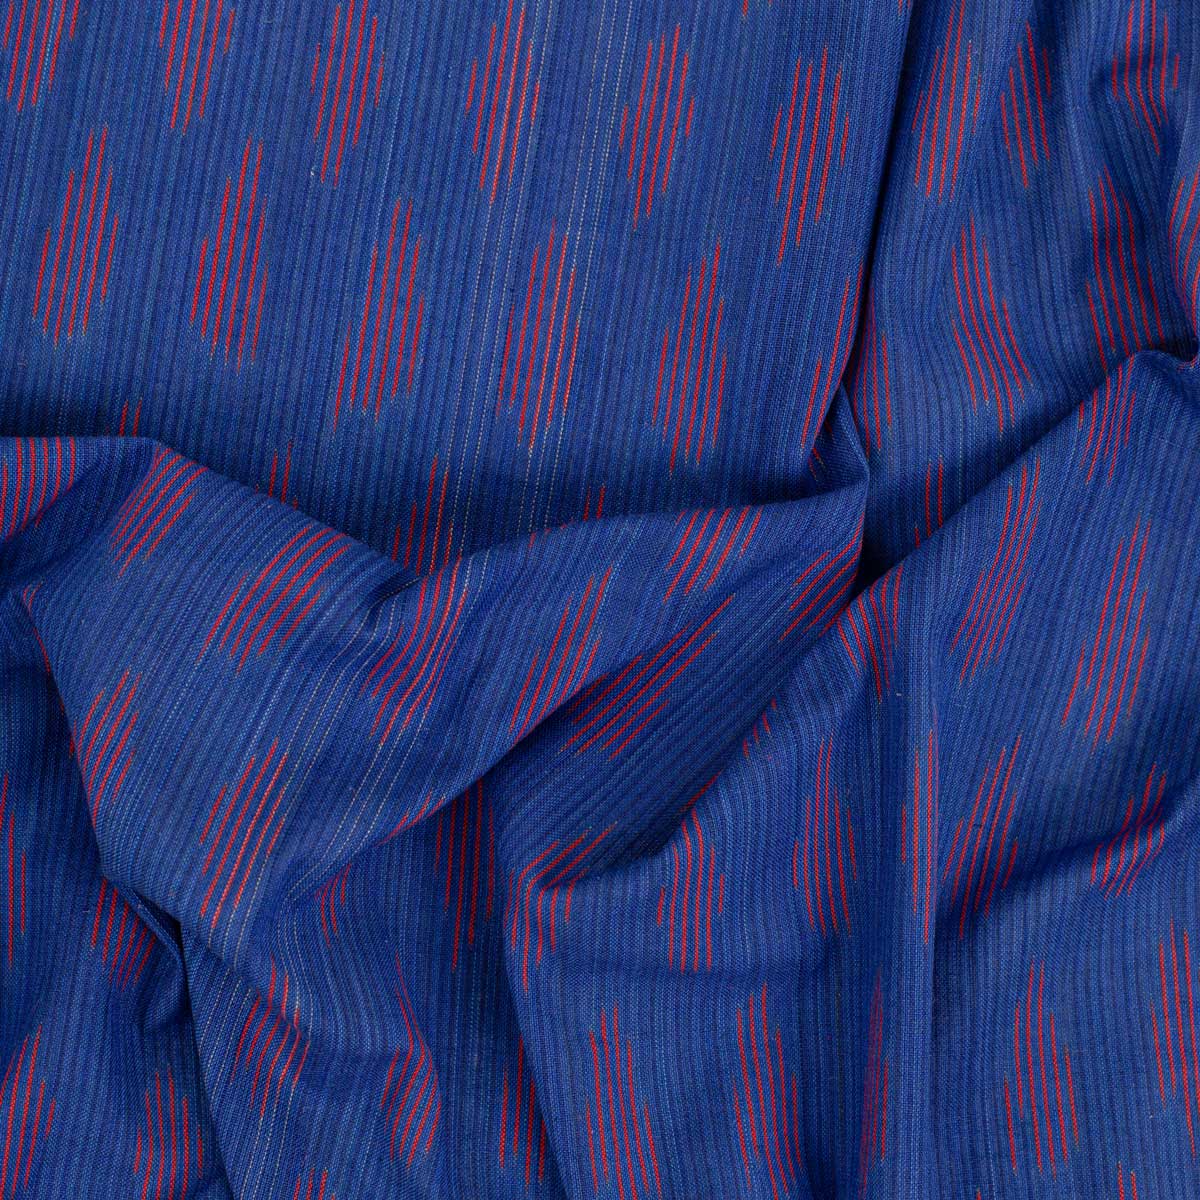 IKAT BLUEBERRY Fabric, blue/red